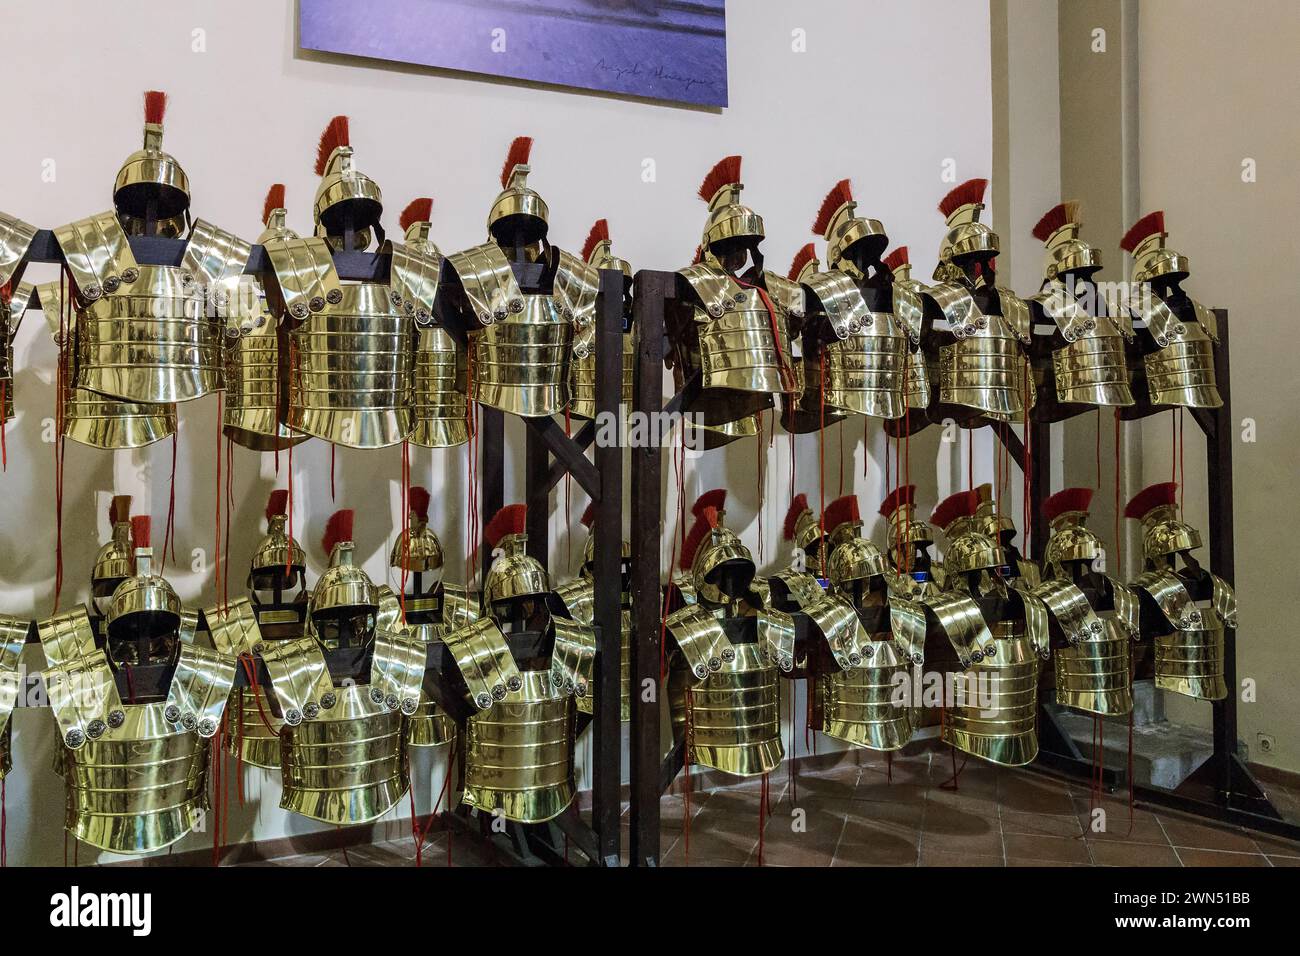 GIRONA, SPAIN - MAY 14, 2017: This is the armor of Roman legionnaires at the exhibition of carnival paraphernalia in the Church of St. Luke.  Stock Photo